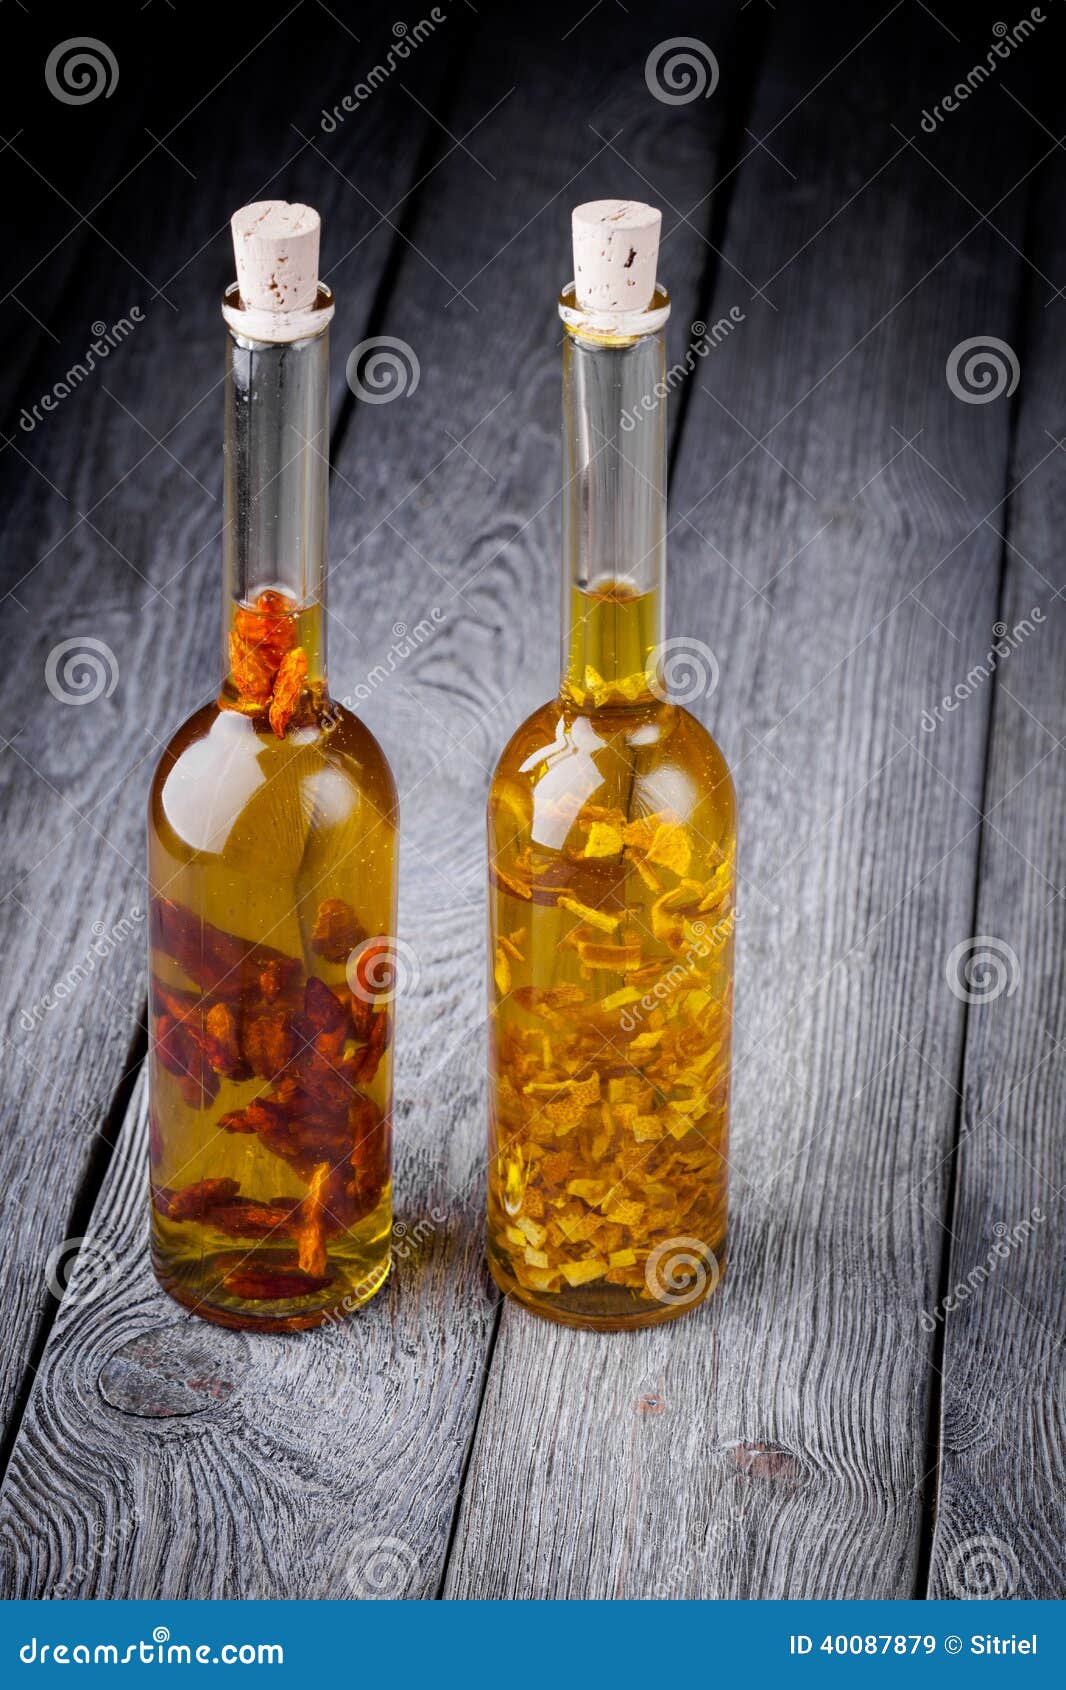 Natural Diy Infused Olive Oil with Chili and Lemon Stock Image - Image ...